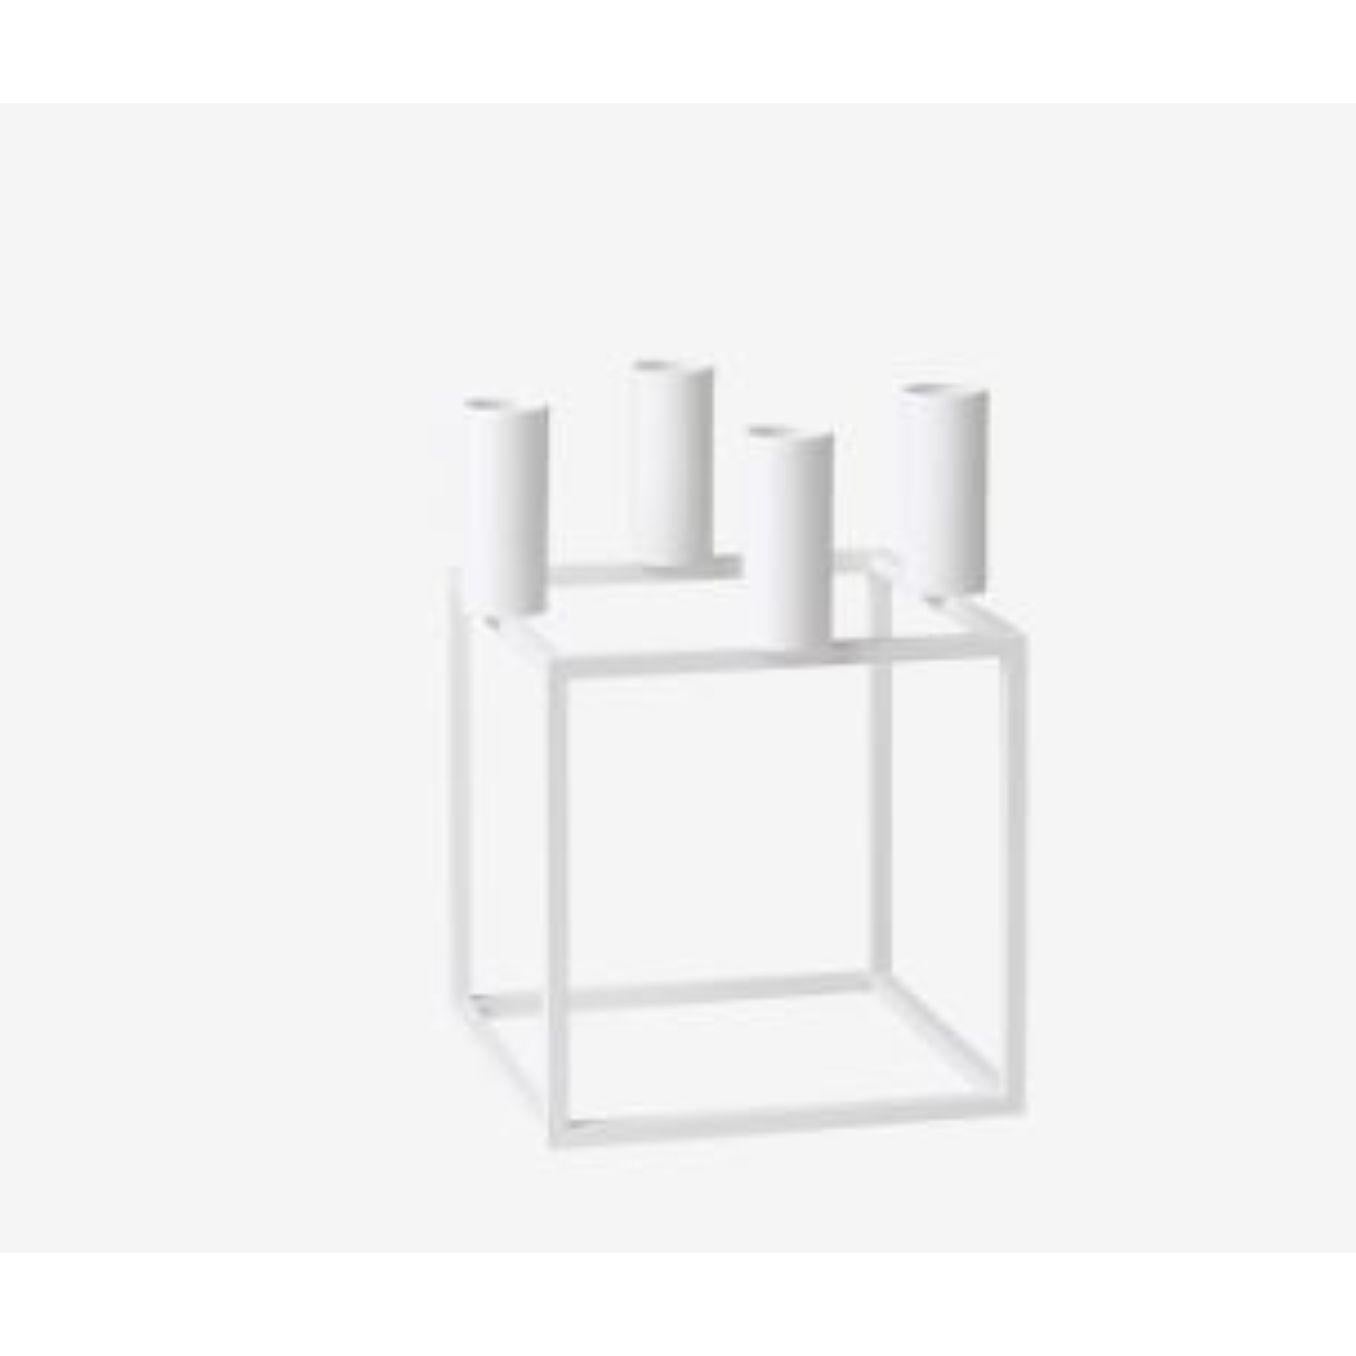 Set of 2 white kubus and base 4 candle holder by Lassen
Dimensions: D 14 x W 14 x H 20 cm 
Materials: Metal 
Also available in different dimensions. 
Weight: 1.50 Kg

A new small wonder has seen the light of day. Kubus Micro is a stylish,